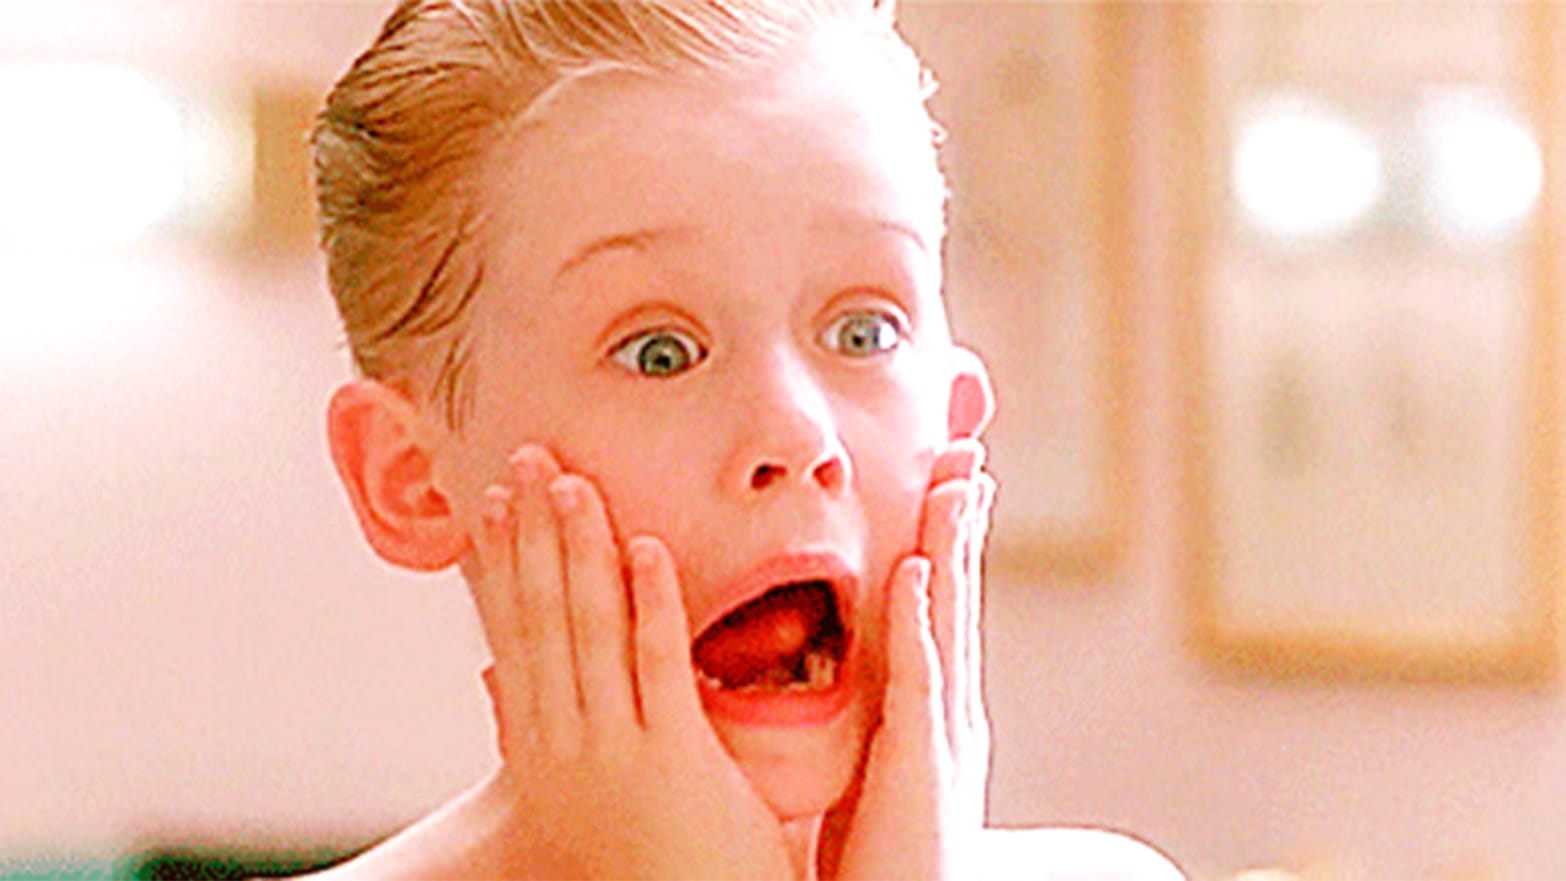 home alone wallpaper,face,skin,facial expression,head,nose